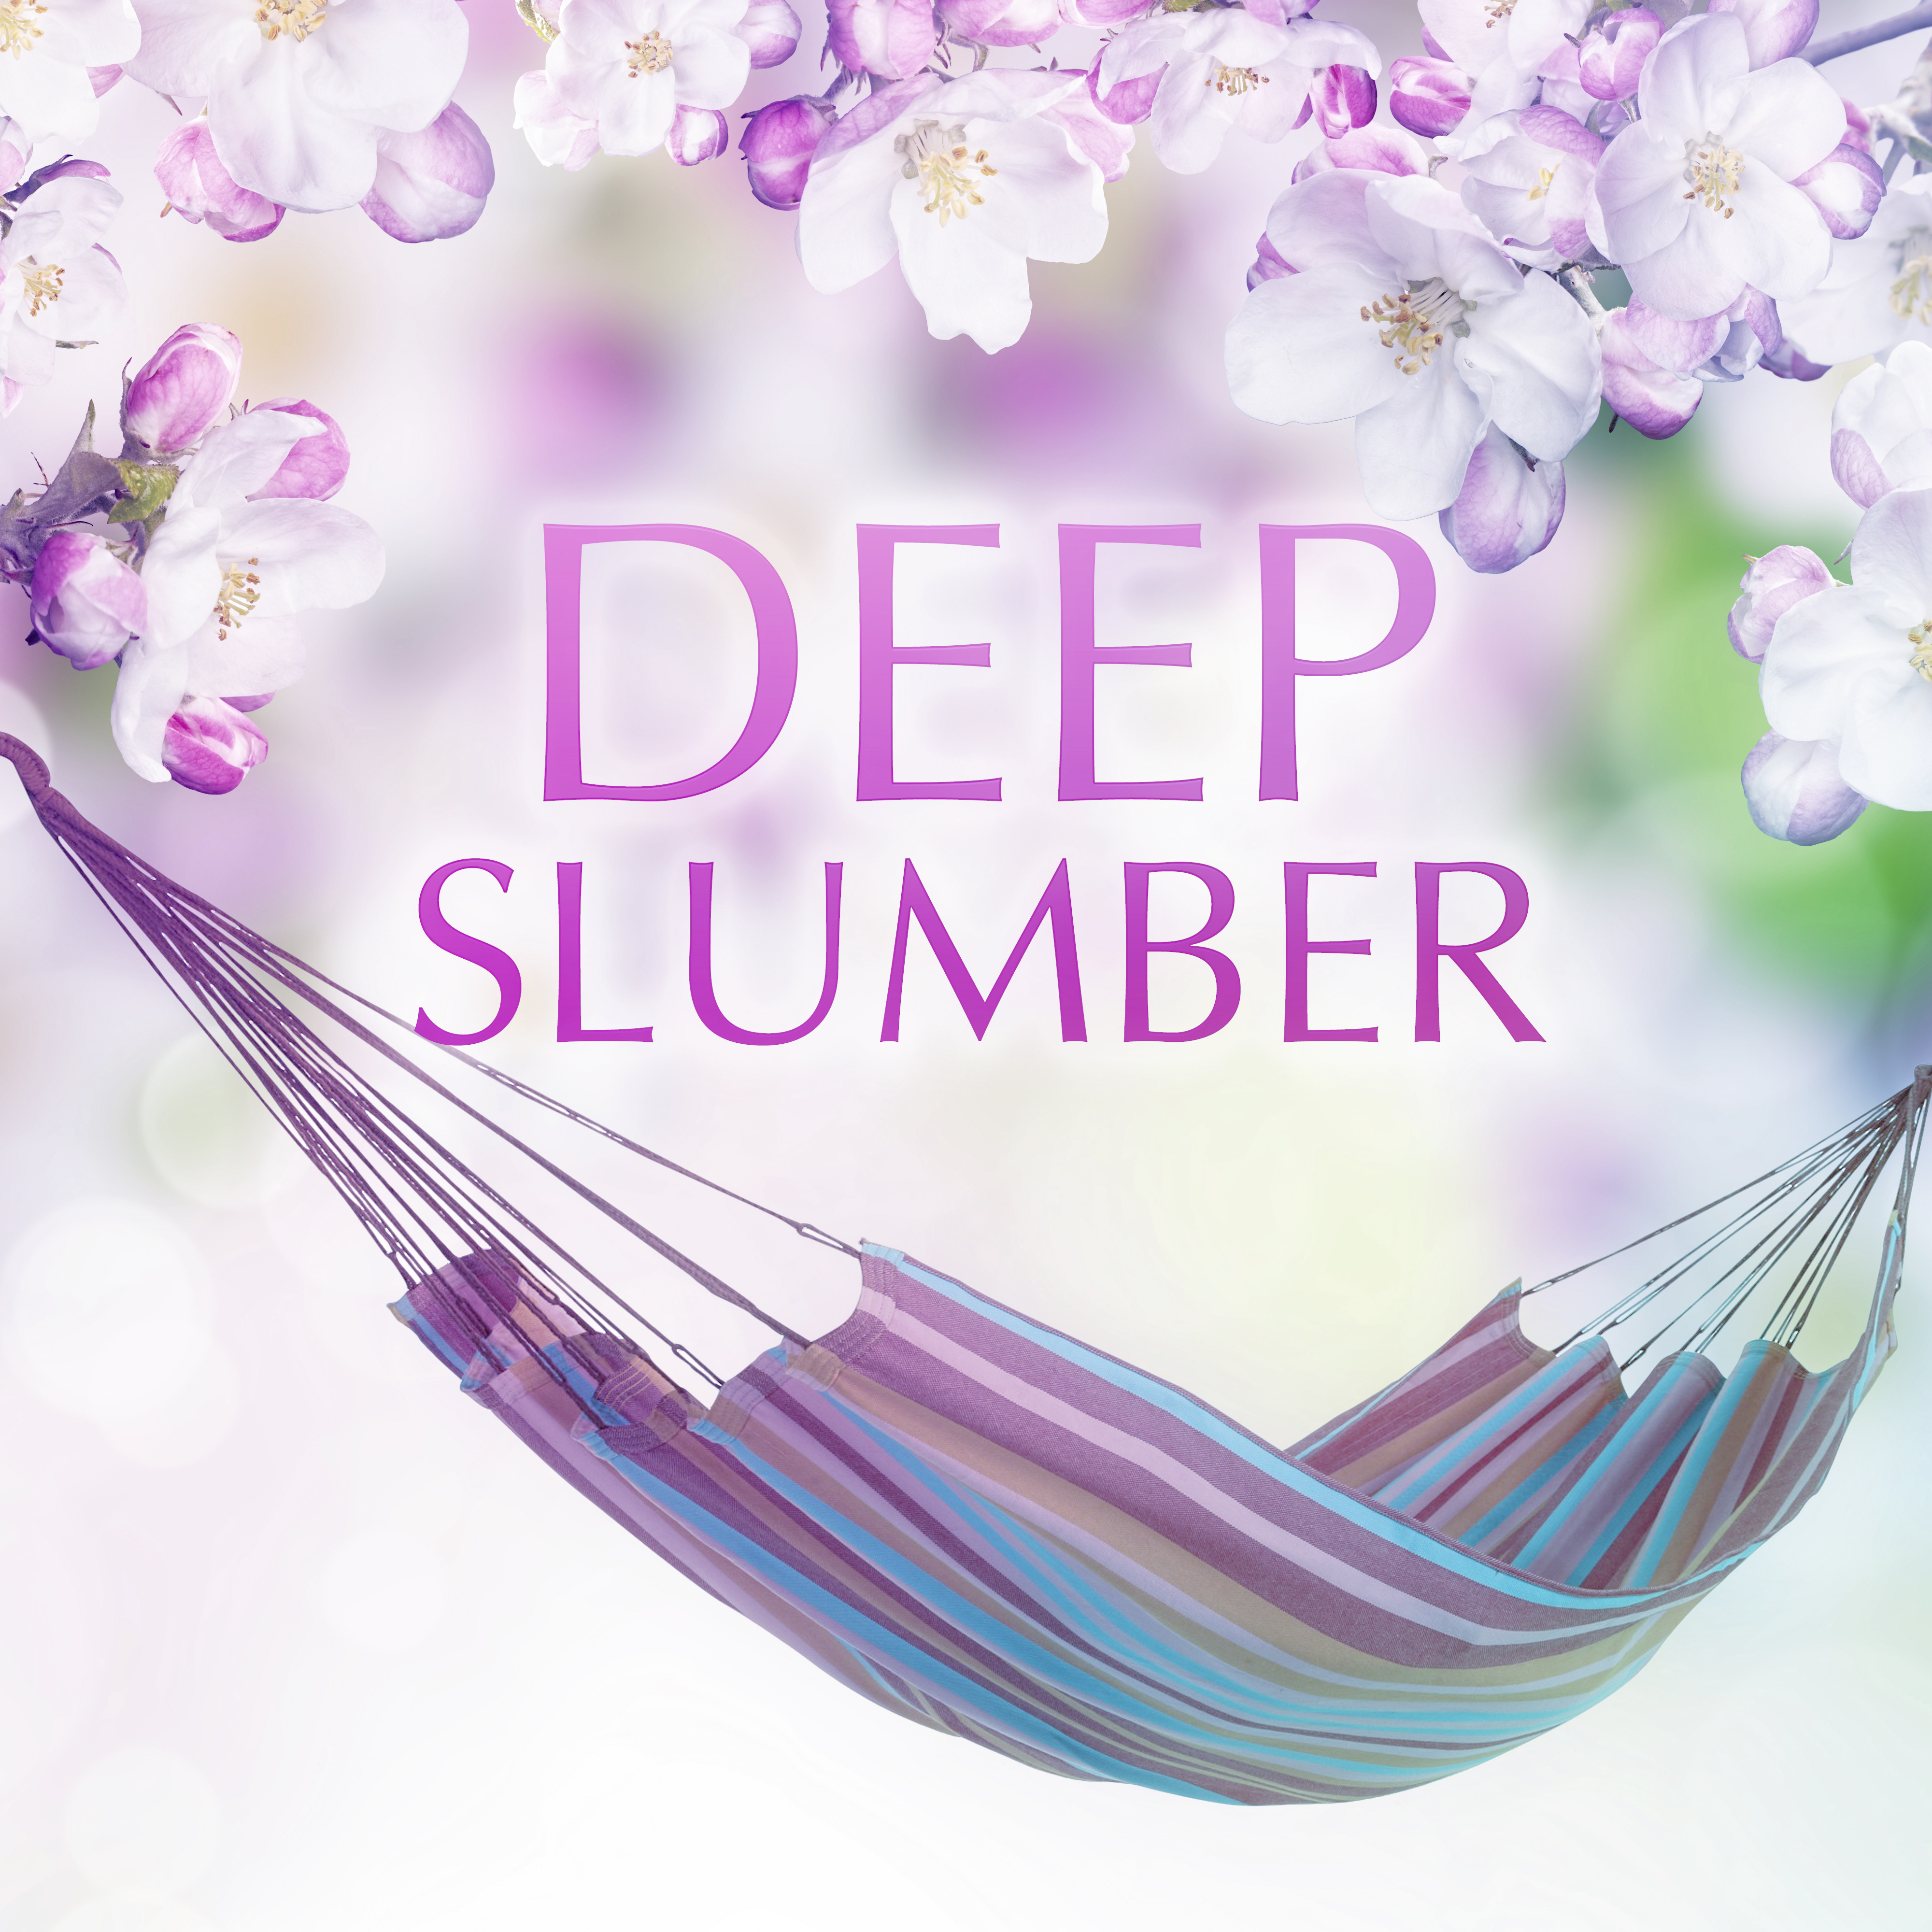 Deep Slumber  Fast Sleep, Dream, Nap Nature Sounds, Calmness, Lullaby, Relaxation, Sleep Therapy